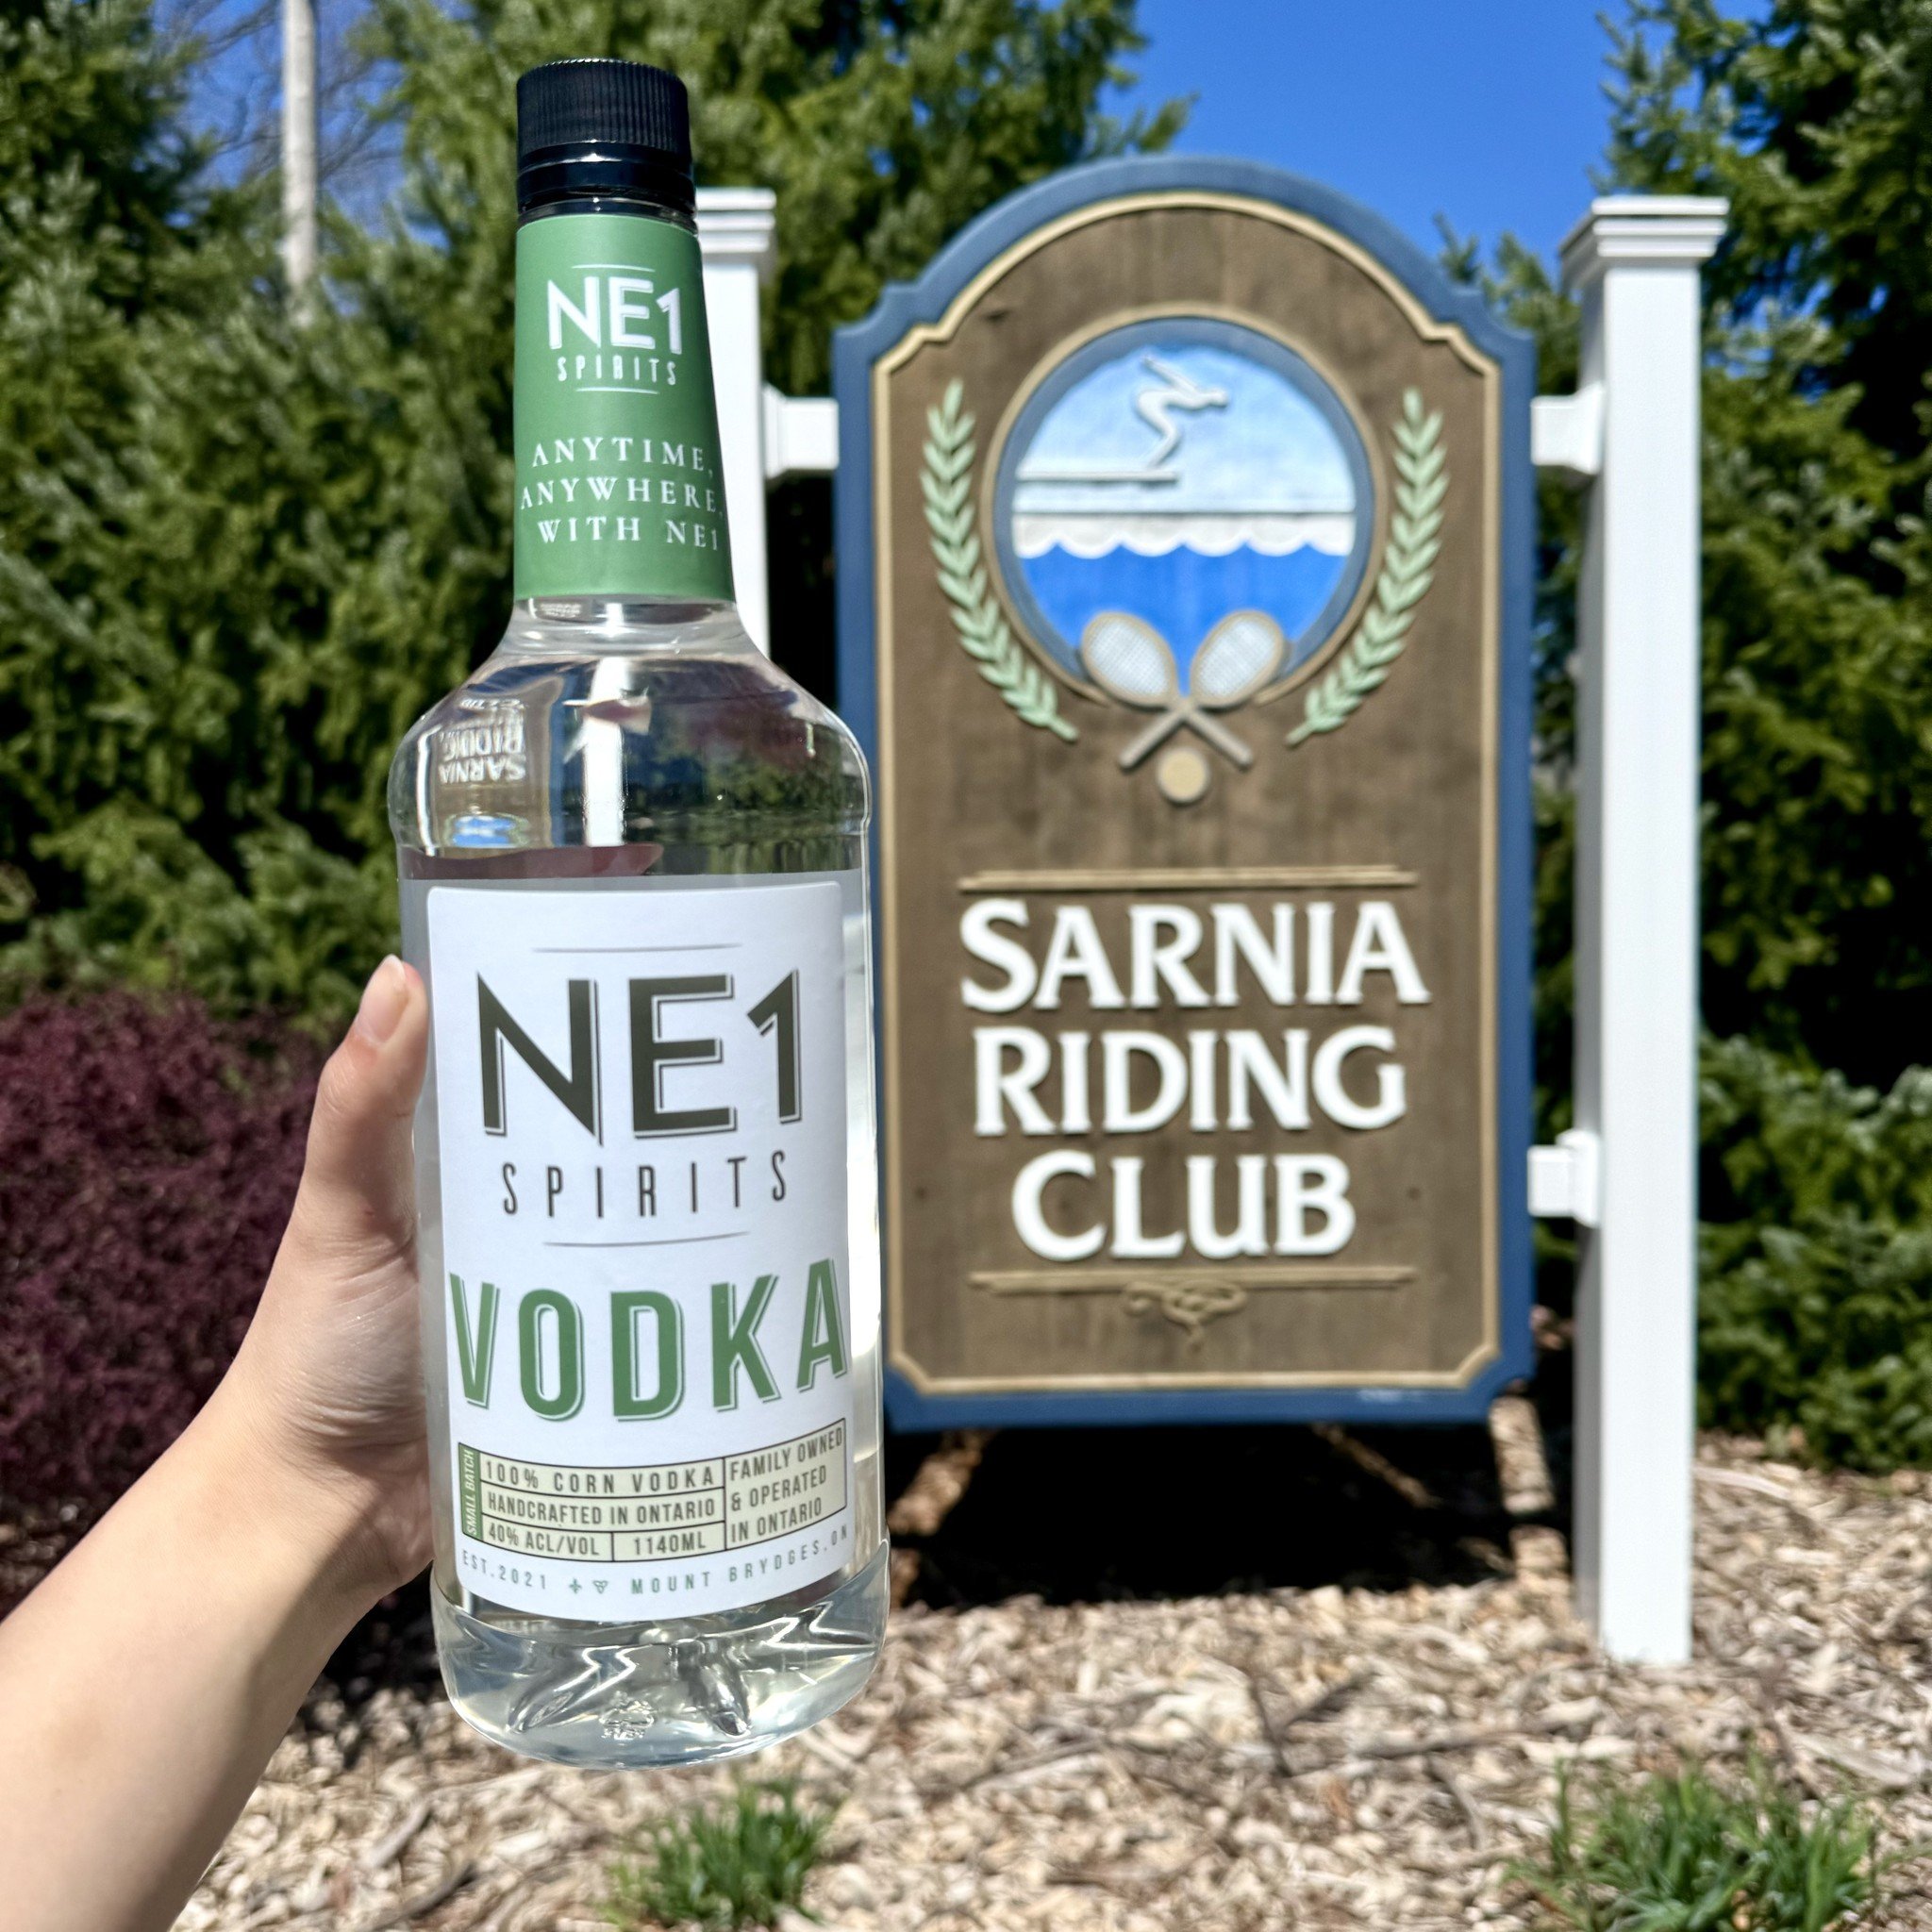 NE1 at The Sarnia Riding Club
@thesarniaridingclub 

We are overjoyed to share that our spirits and canned cocktails will now be available at this historical property on the shores of Lake Huron. This was one of my first ever Sarnia accounts when I s